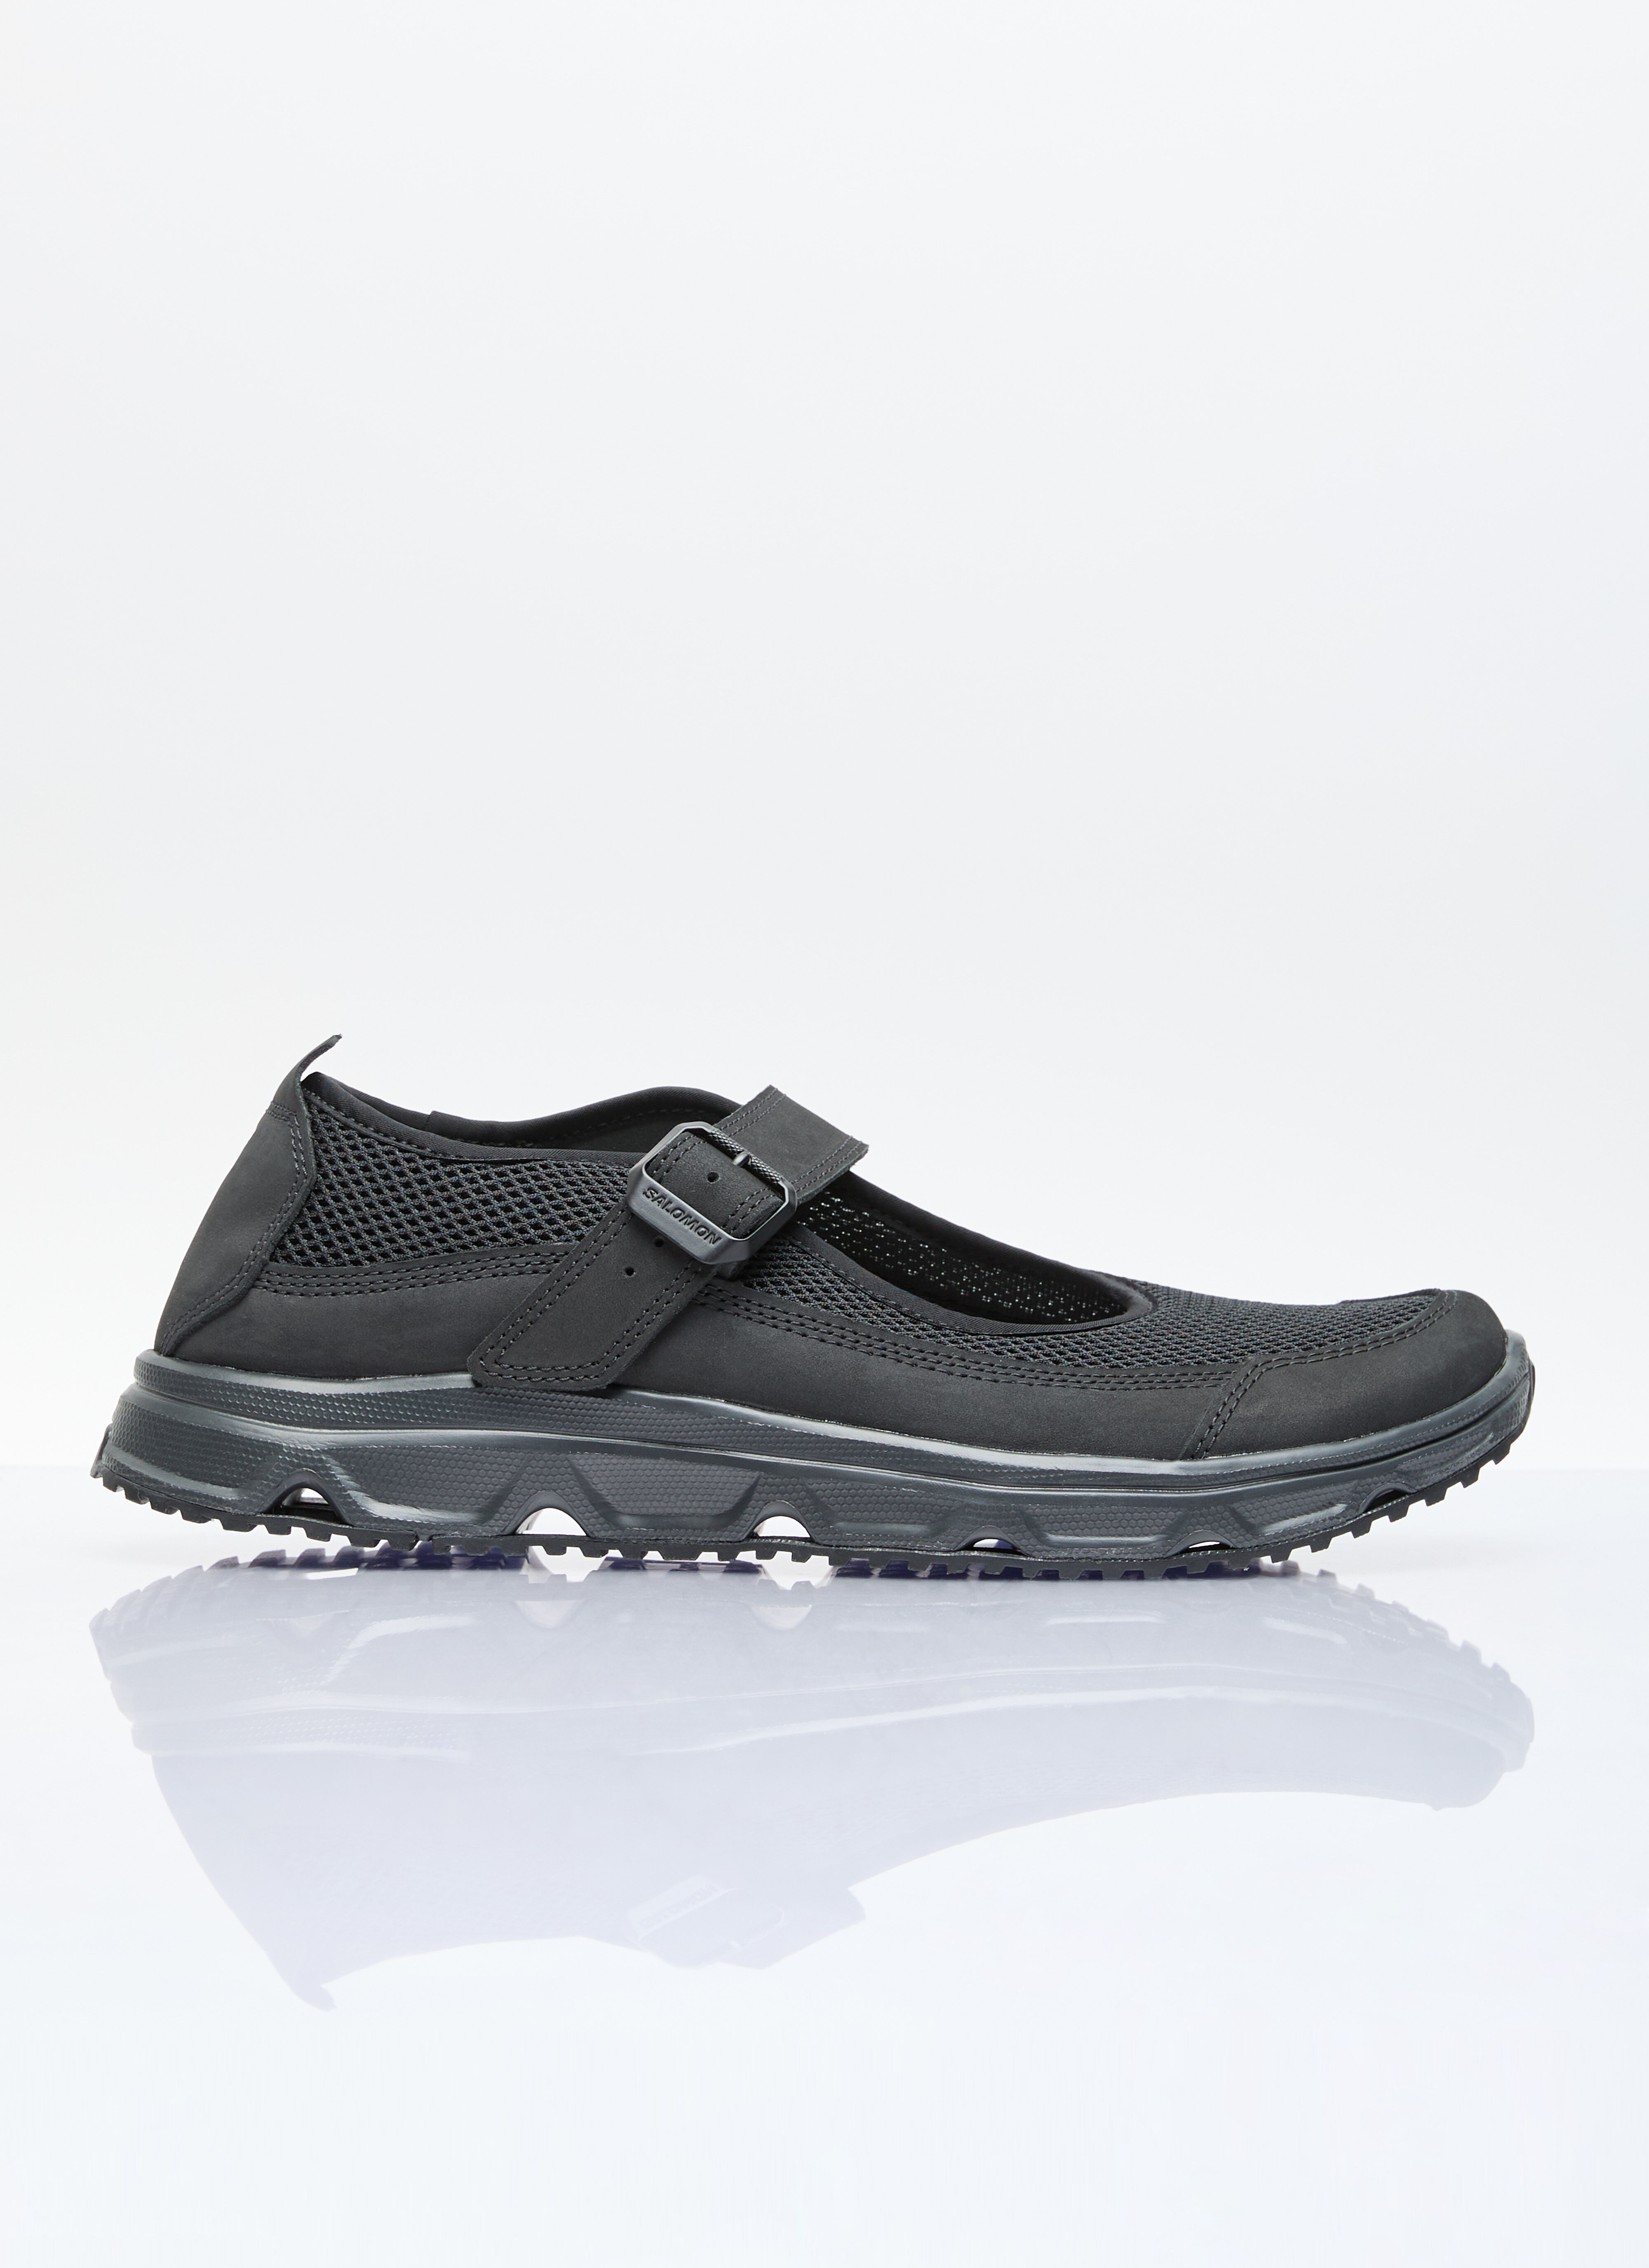 Thom Browne RX- Marie-Jeanne Slip-On Shoes Blue thb0155014